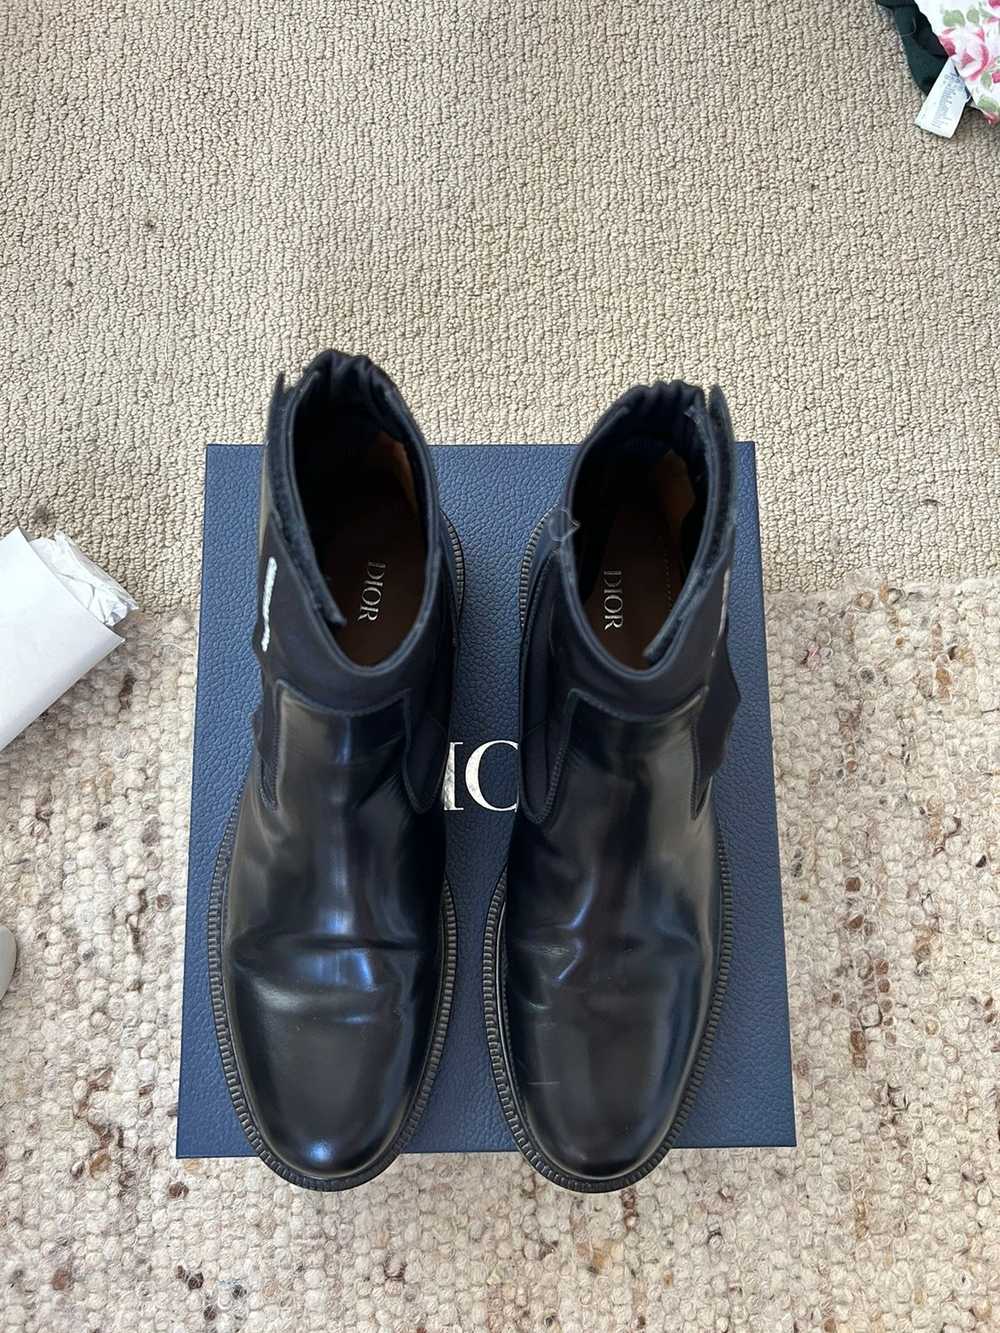 Dior Dior Men AW19 Evidence Chelsea boots - image 4